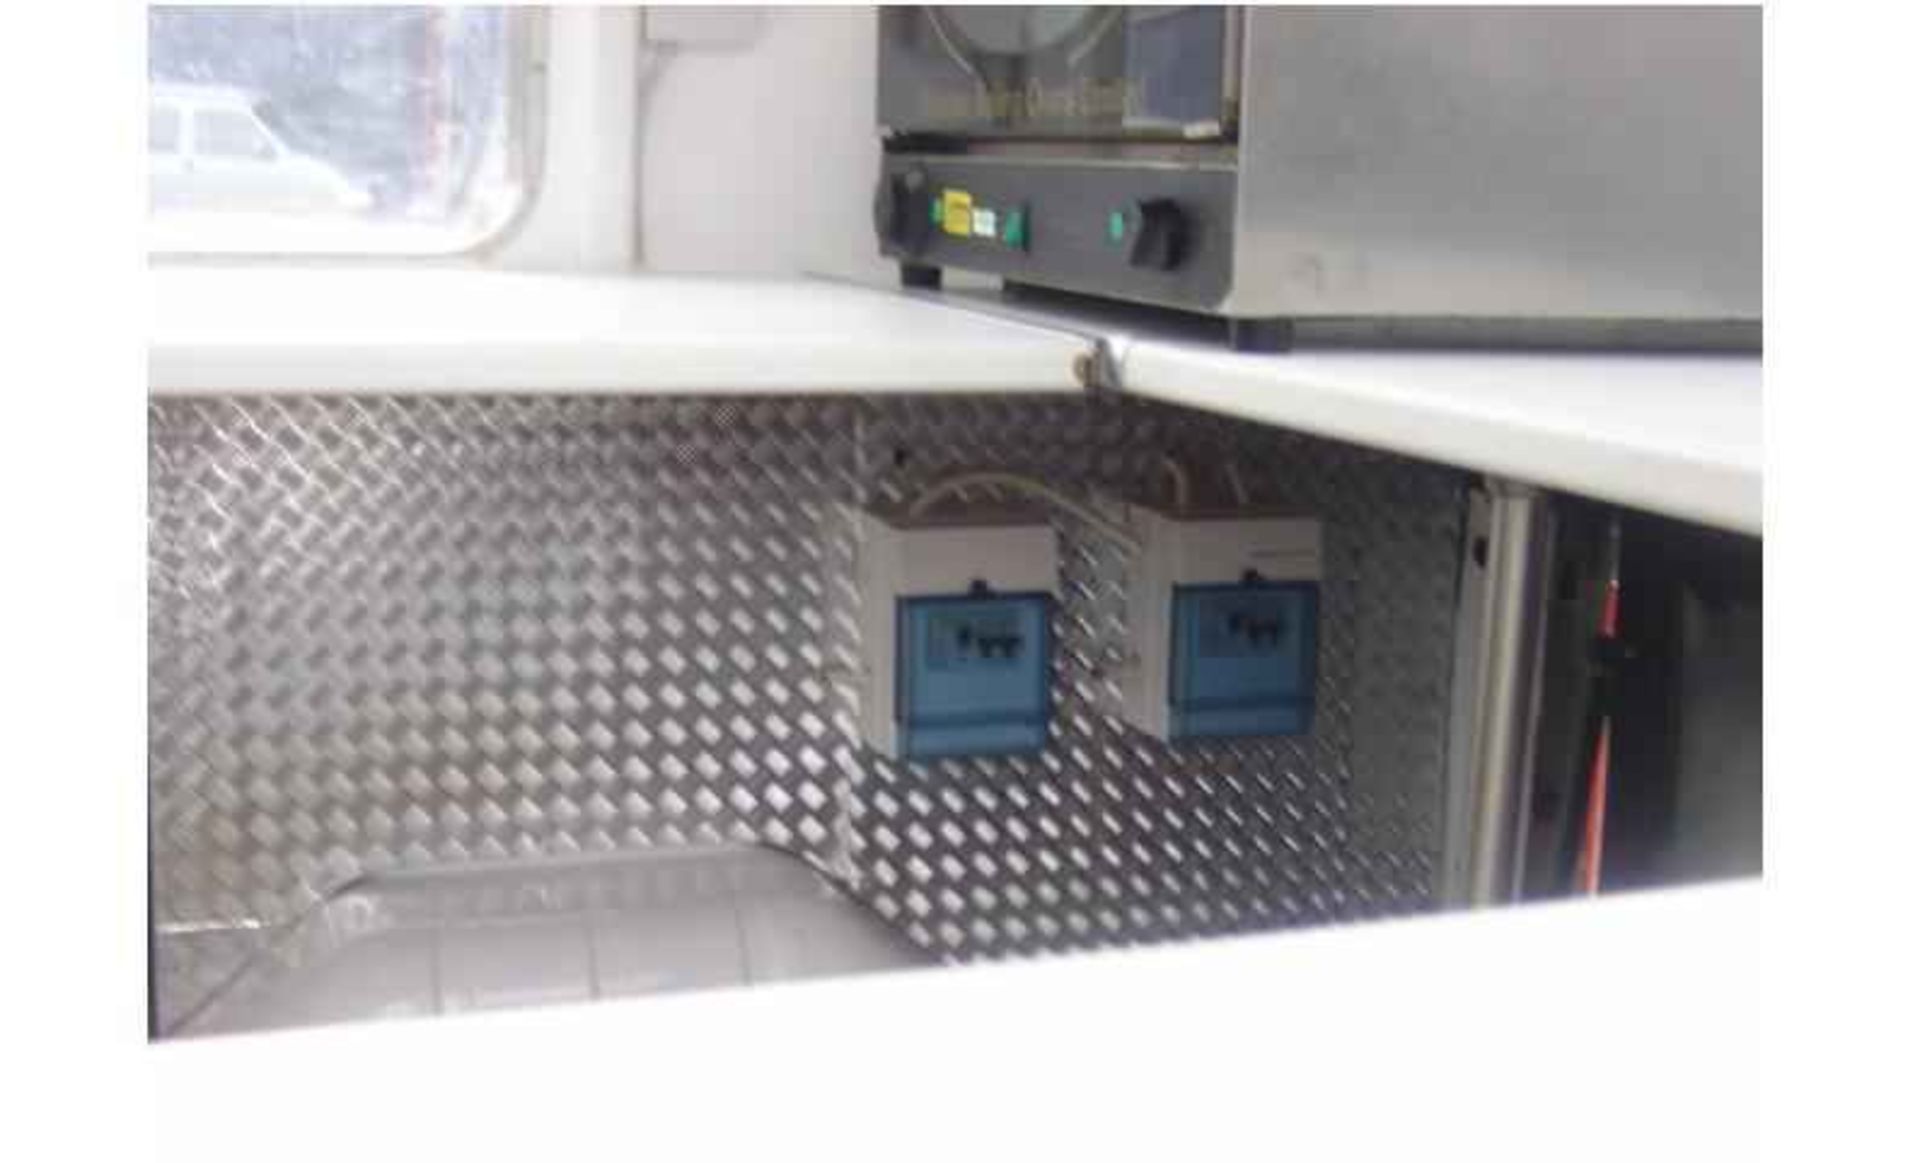 Ford Transit MK7 Soft Ice Cream Van – 2007 – Diesel – 119,000 MilesElectric windows, Central - Image 7 of 8